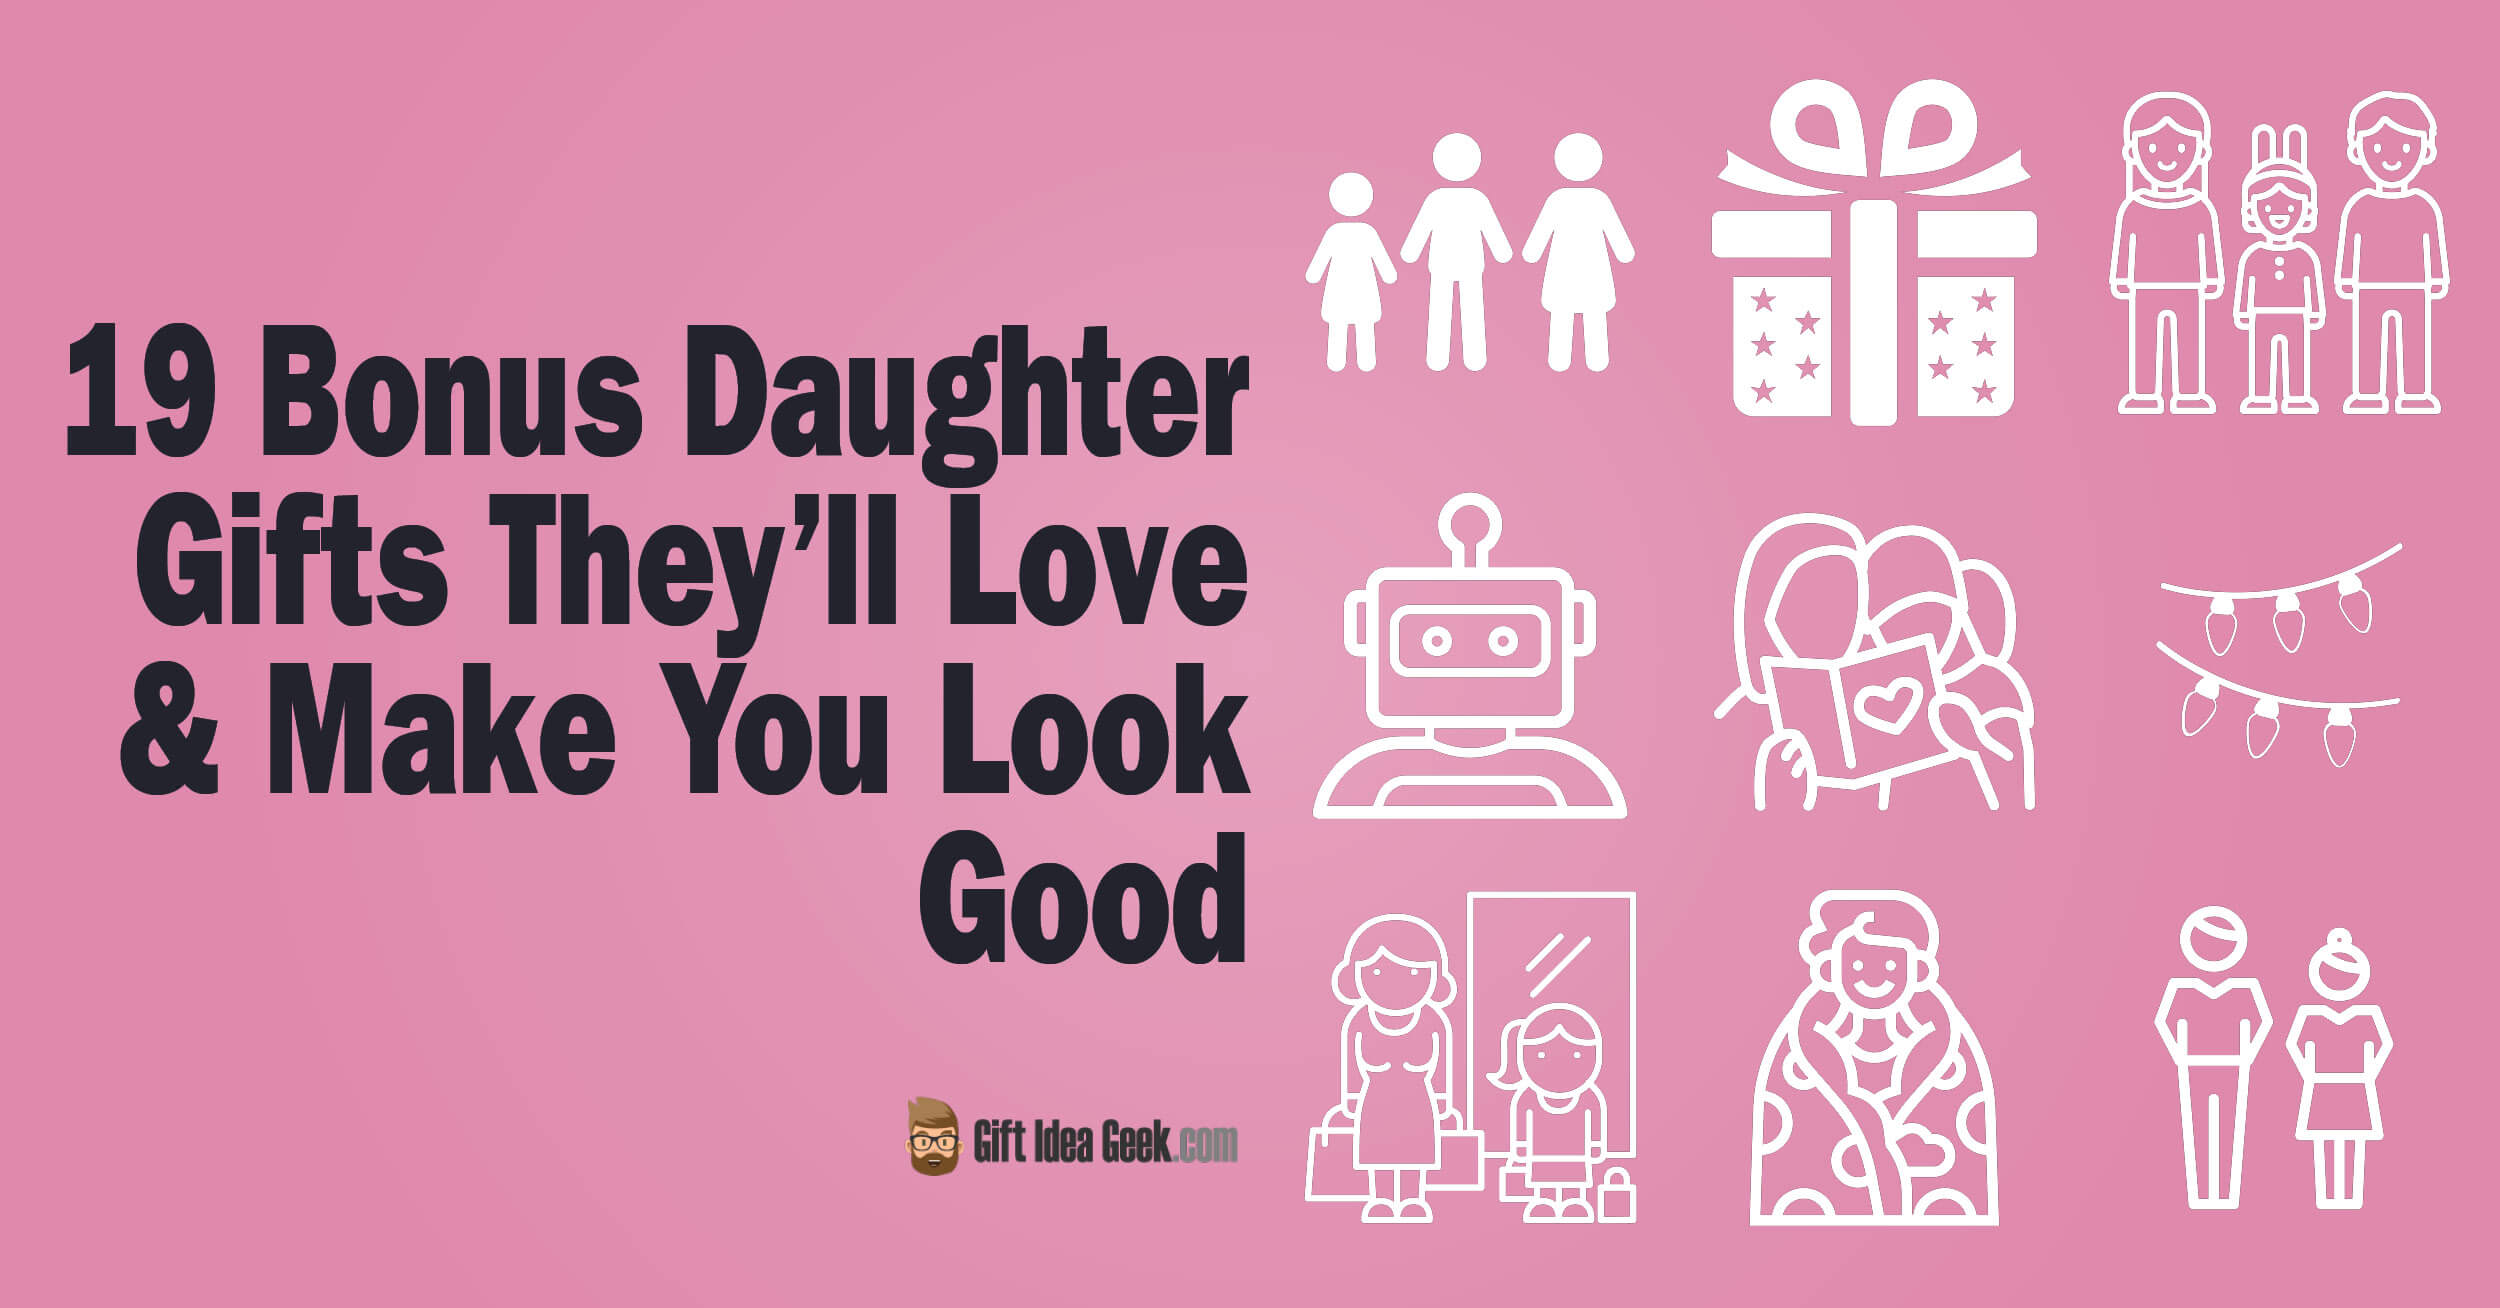 19 Bonus Daughter Gifts They’ll Love & Make You Look Good